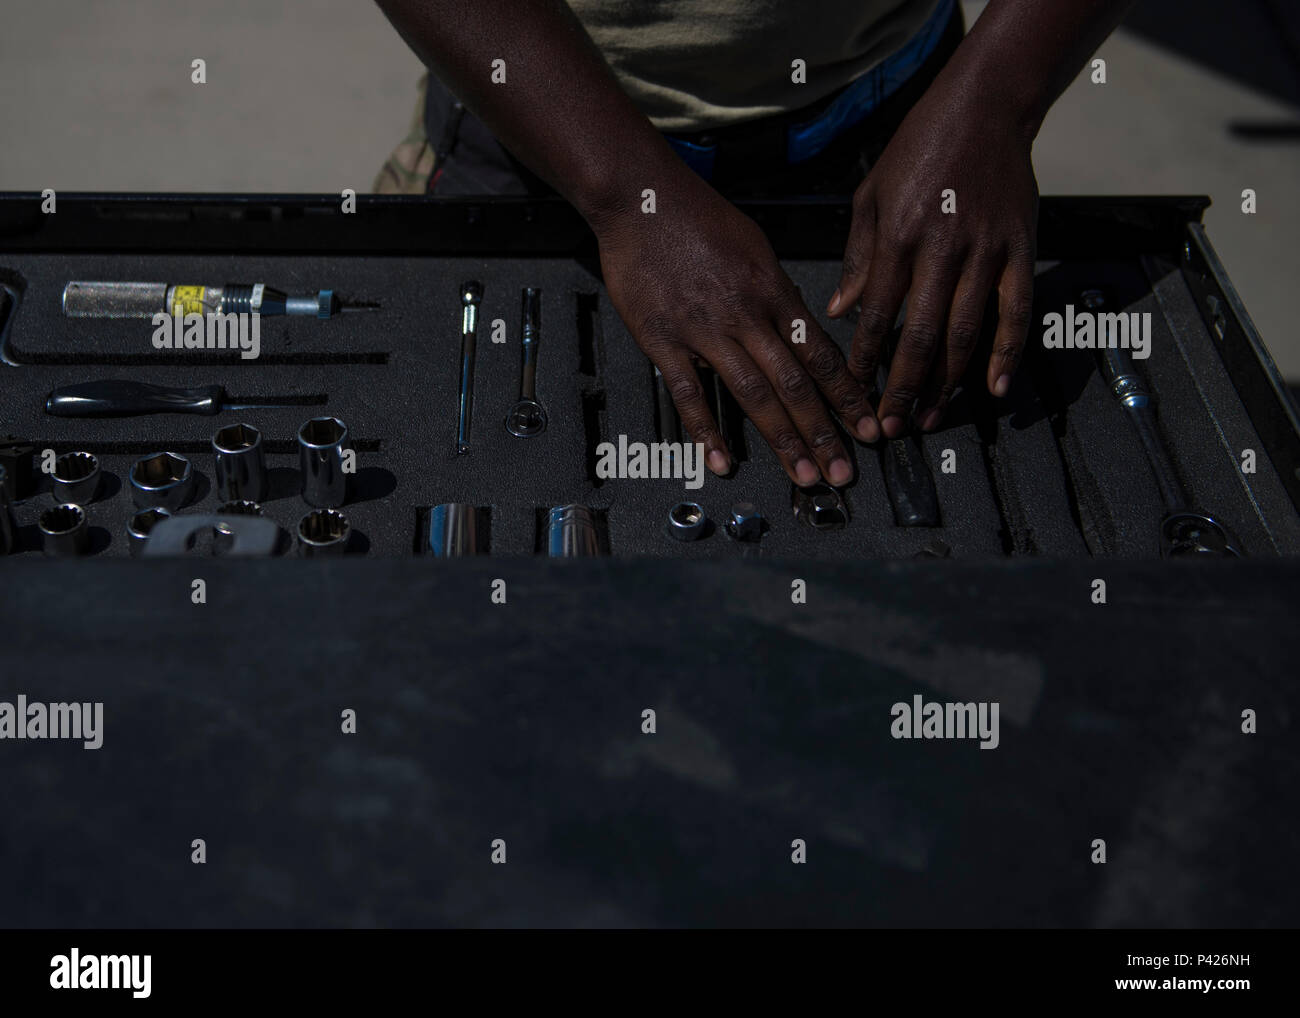 Senior Airman Clarence Williams, 455th Expeditionary Aircraft Maintenance Squadron weapons maintainer, prepares tools to load two GBU (Guided Bomb Unit)-54 on an F-16C Fighting Falcon during routine weapons upload at Bagram Airfield, Afghanistan, June 07, 2016. Airmen with the 455th EAMXS weapons flight ensure the aircraft are armed, combat ready, and fully operational before every F-16 take off. (U.S. Air Force photo by Senior Airman Justyn M. Freeman) Stock Photo